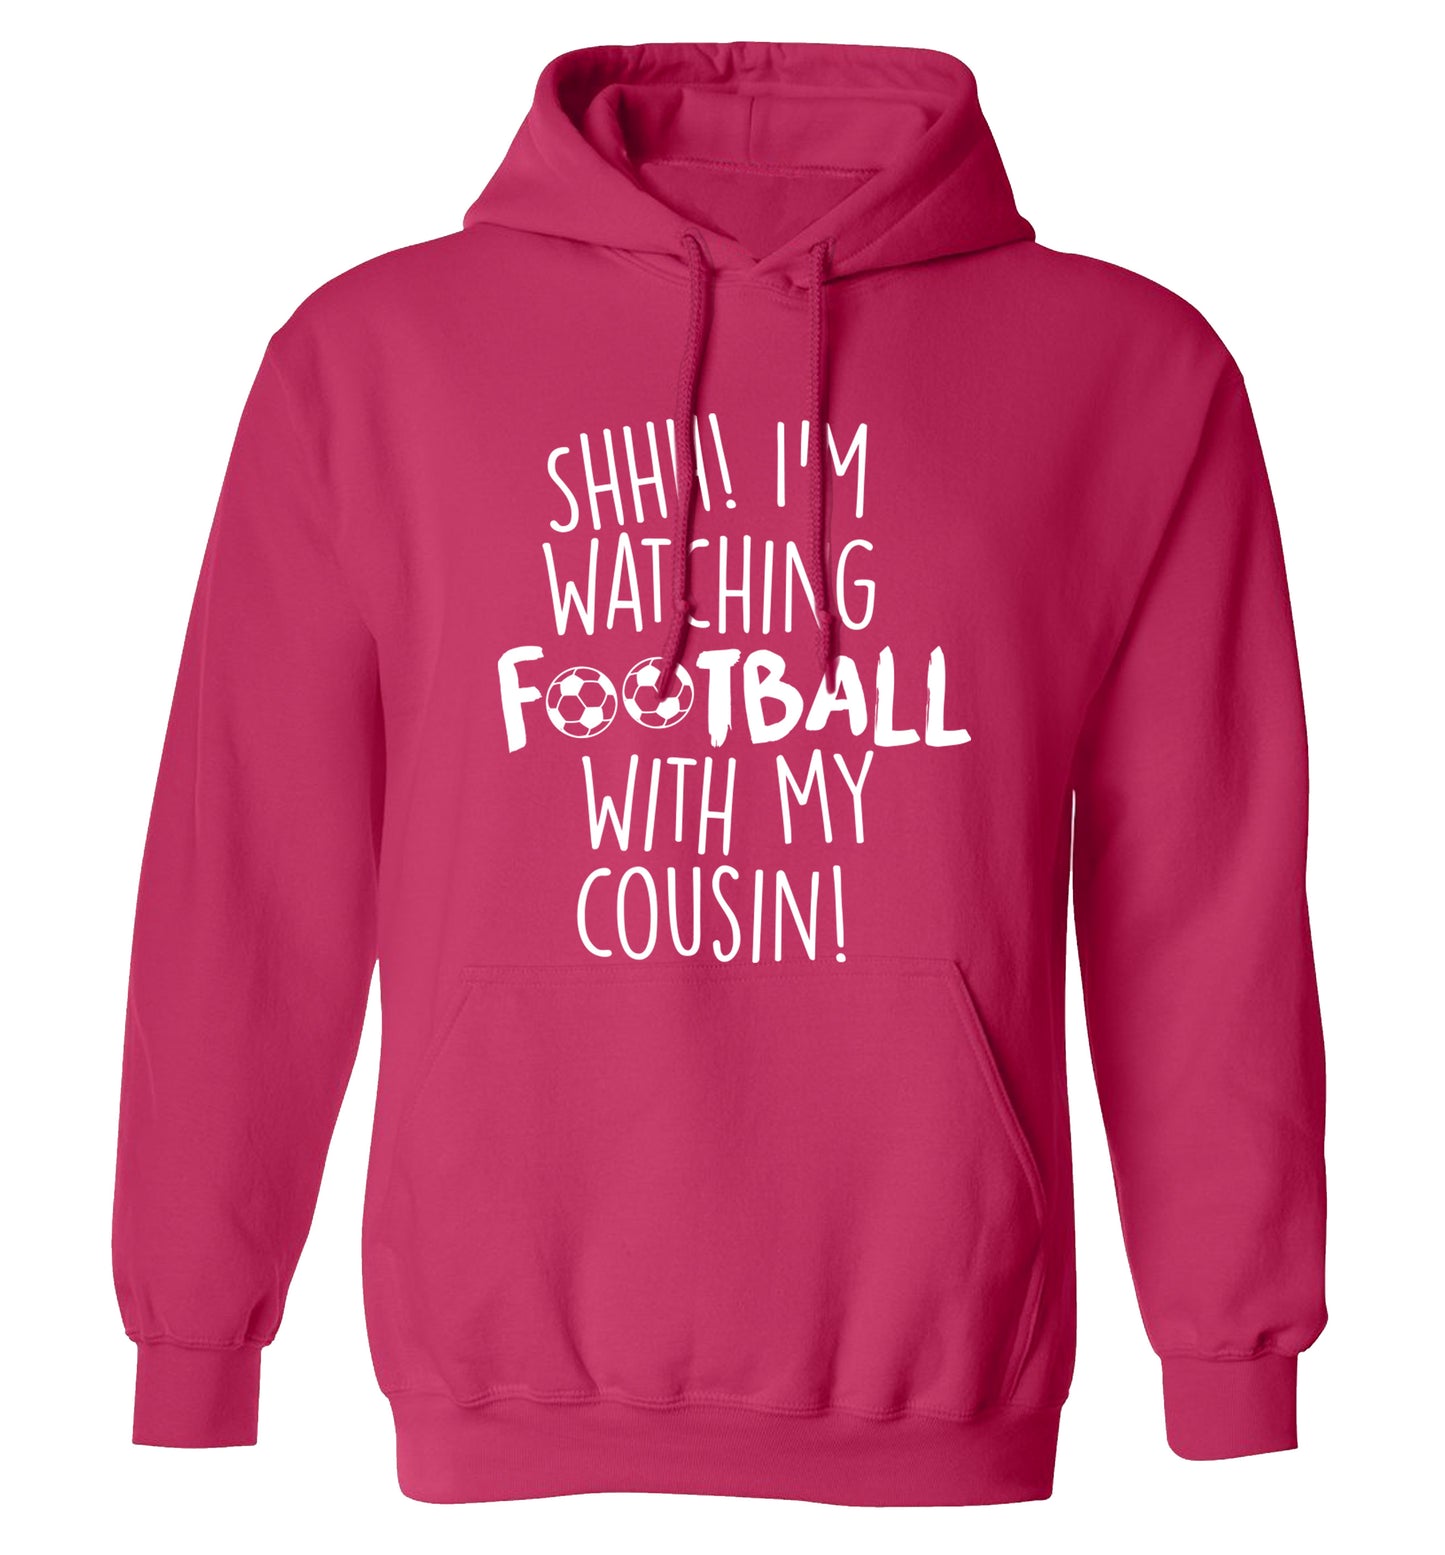 Shhh I'm watching football with my cousin adults unisexpink hoodie 2XL